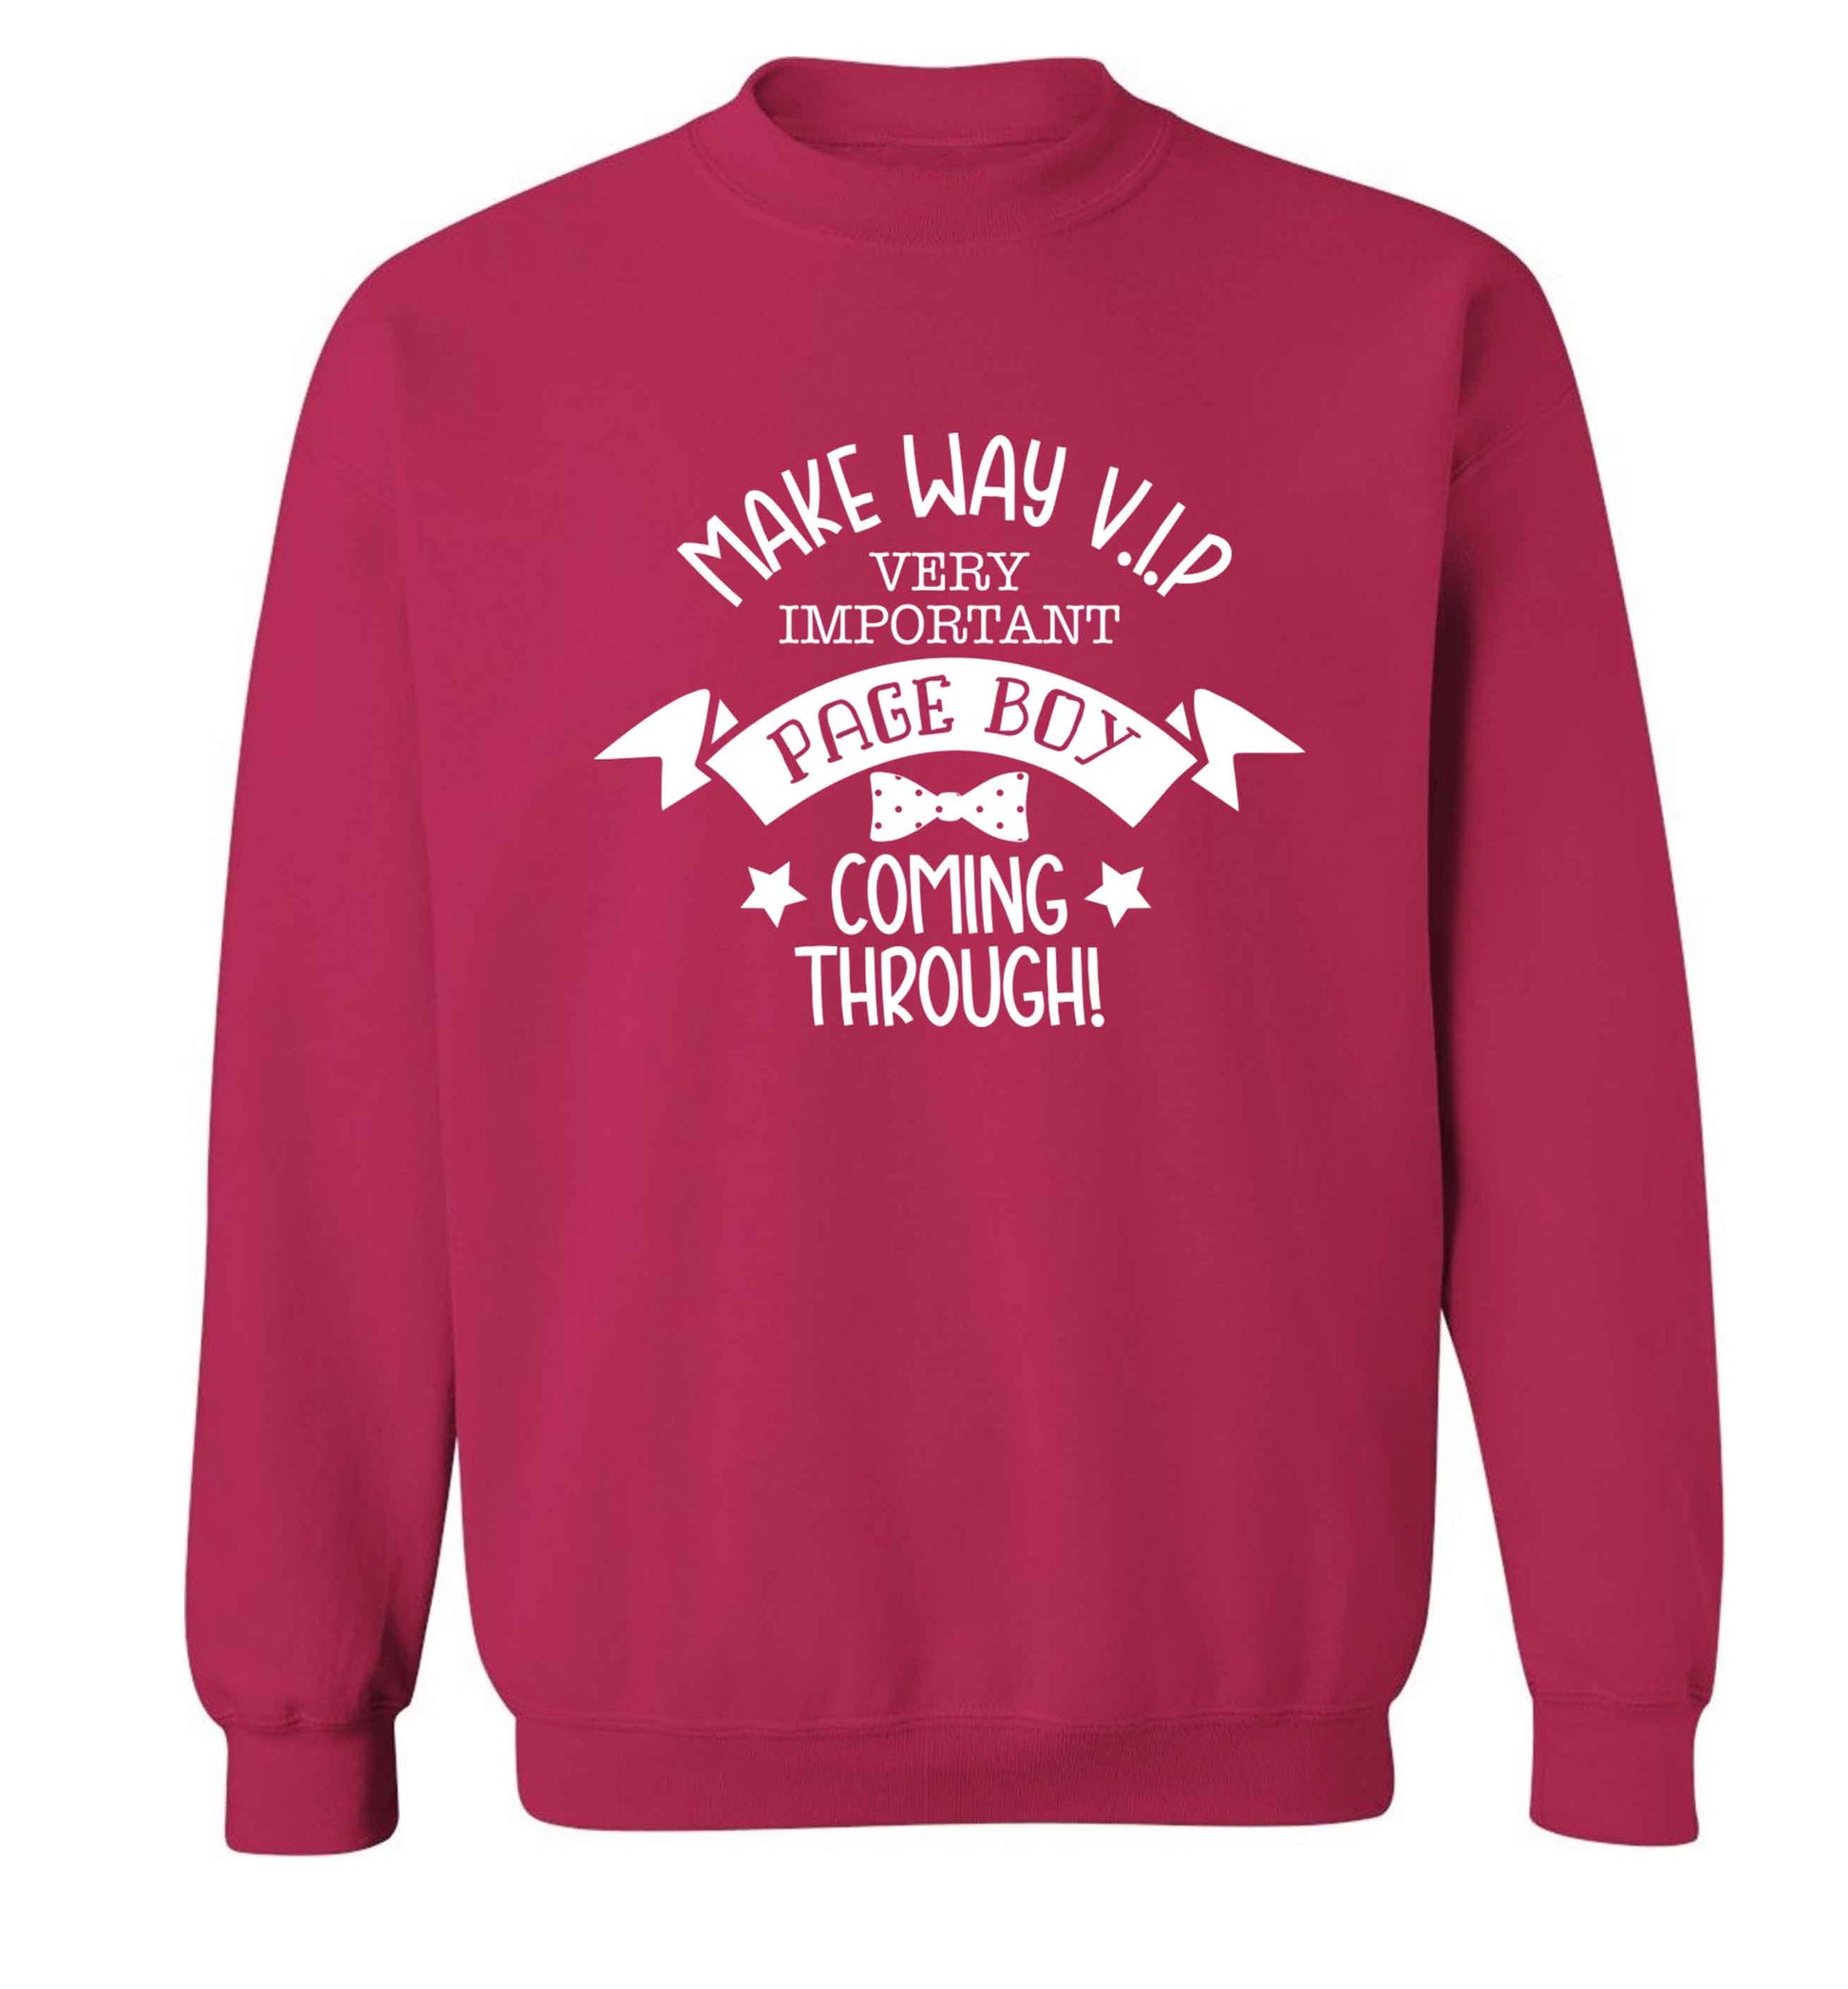 Make way V.I.P page boy coming through! Adult's unisex pink Sweater 2XL